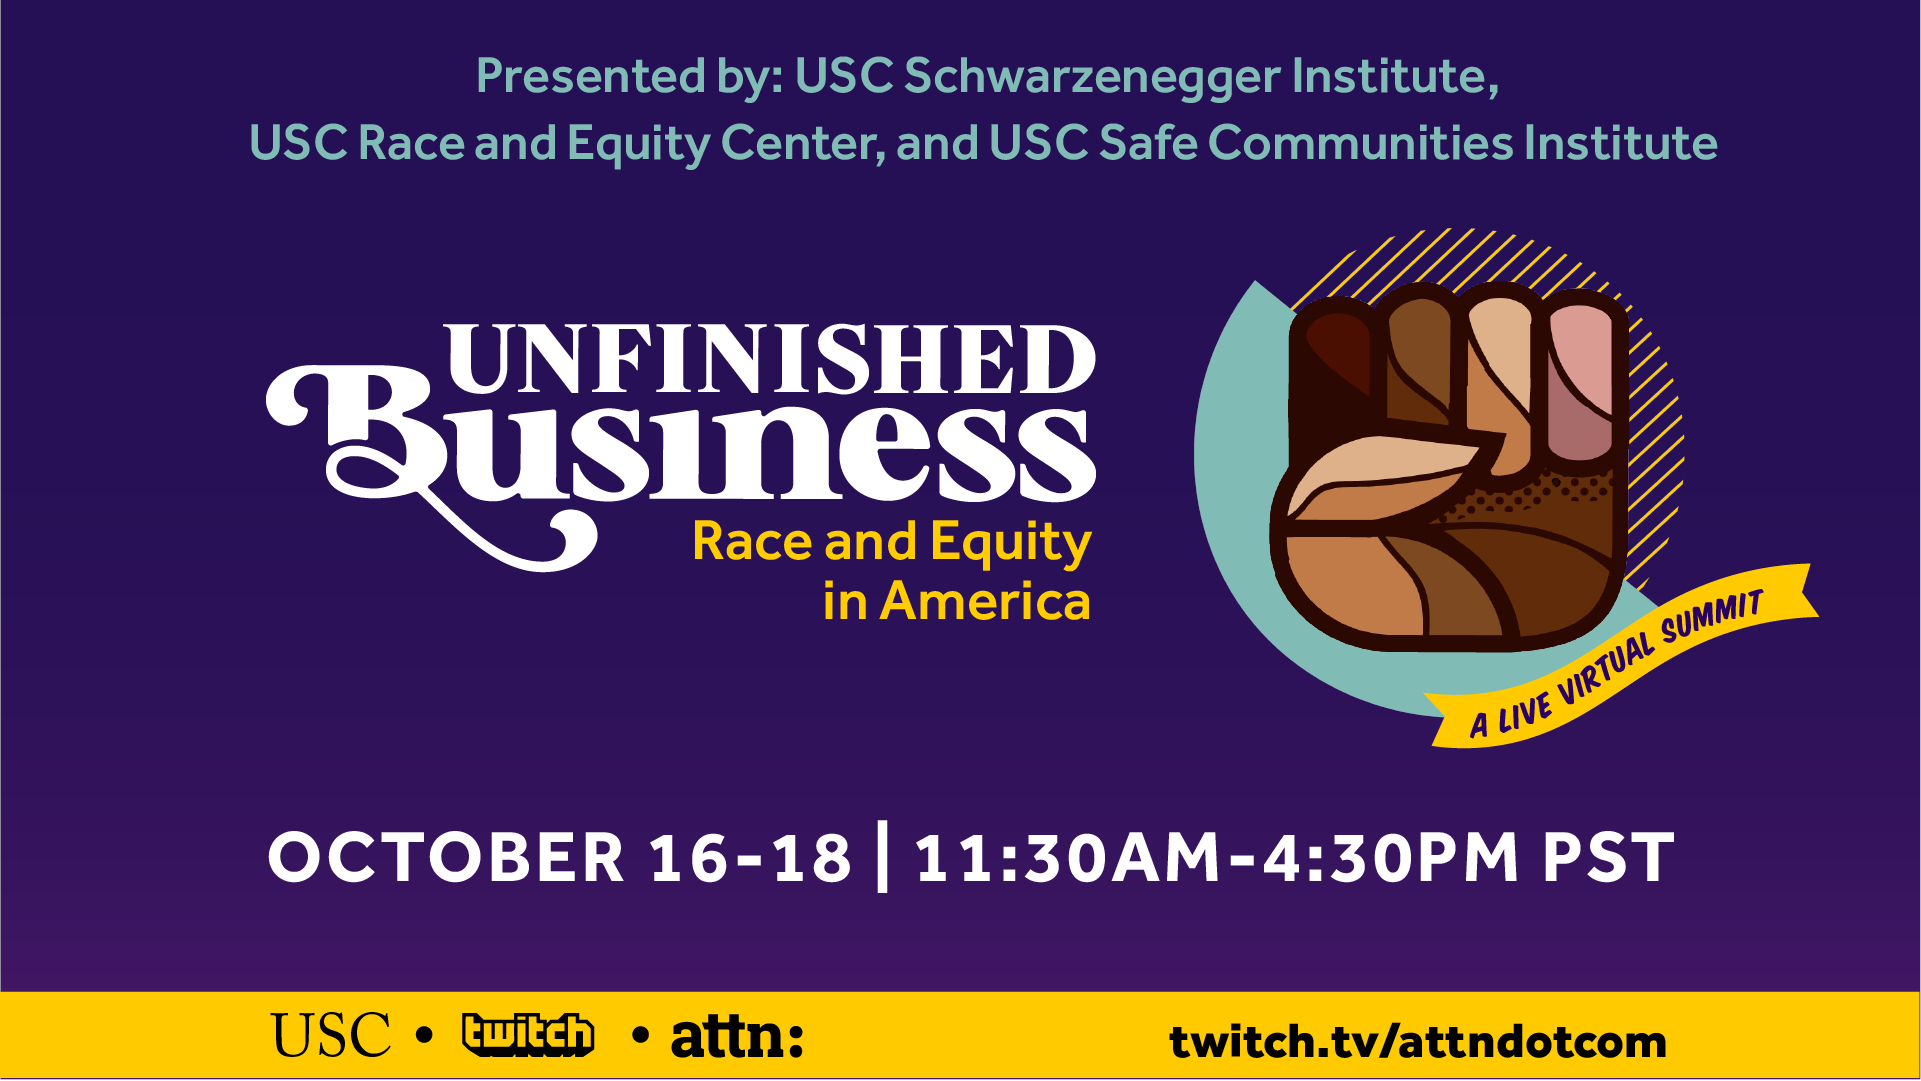 Unfinished Business - Race and Equity in America